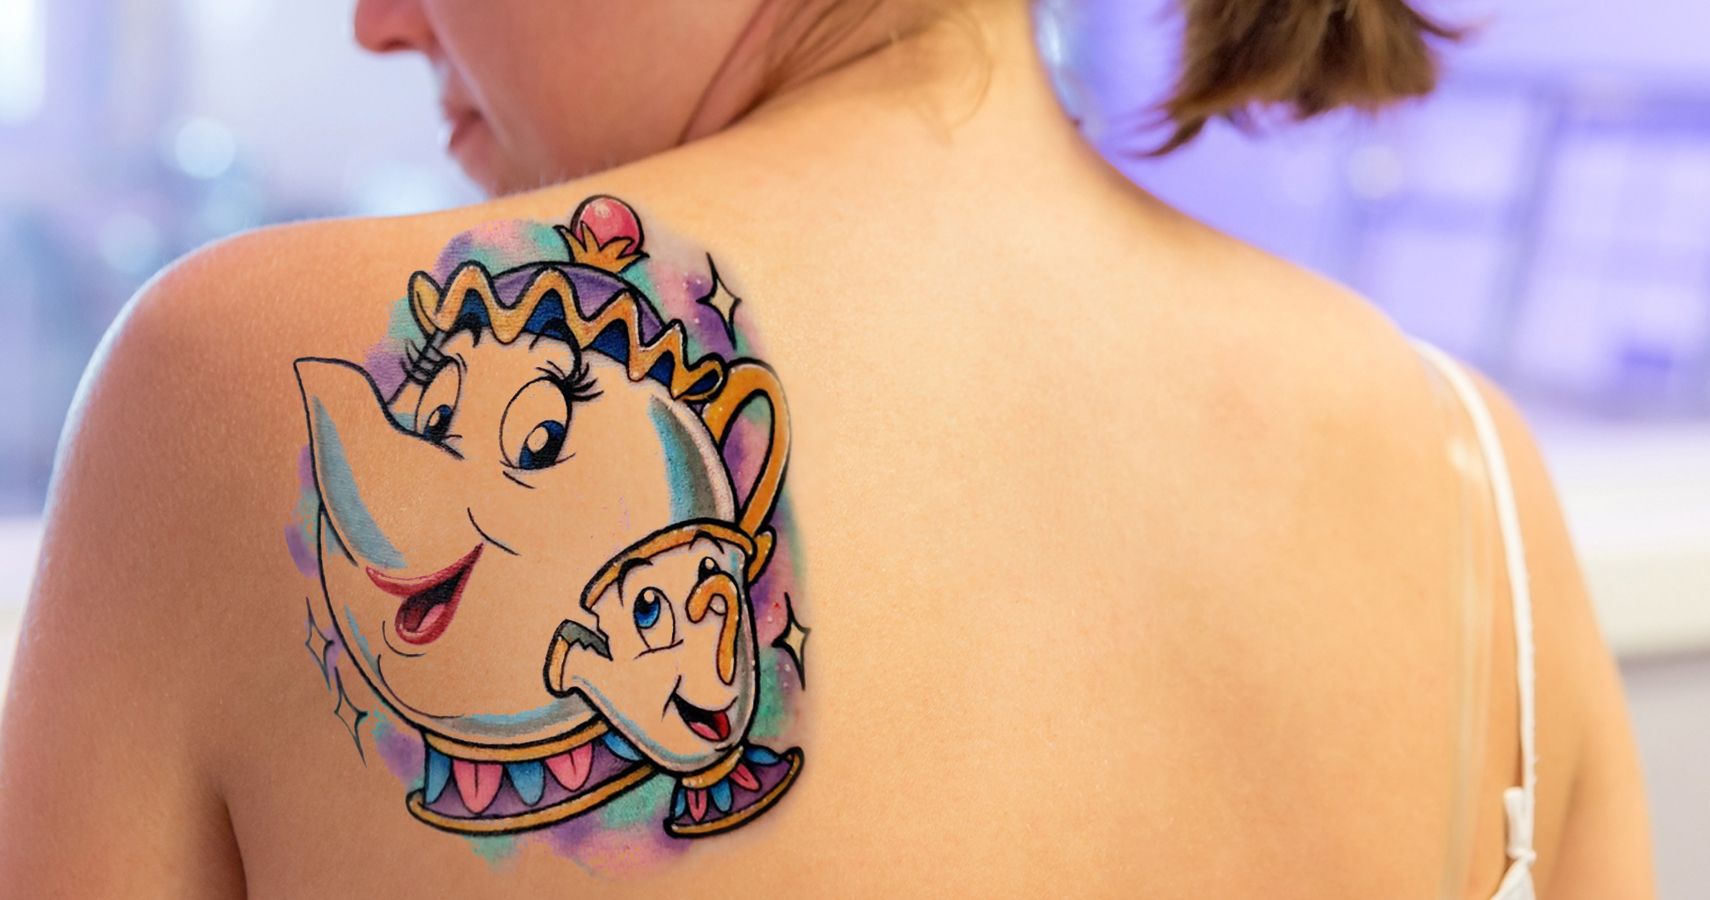 These Mother-Daughter Tattoos Are So Cute, You'll Want One |  LittleThings.com